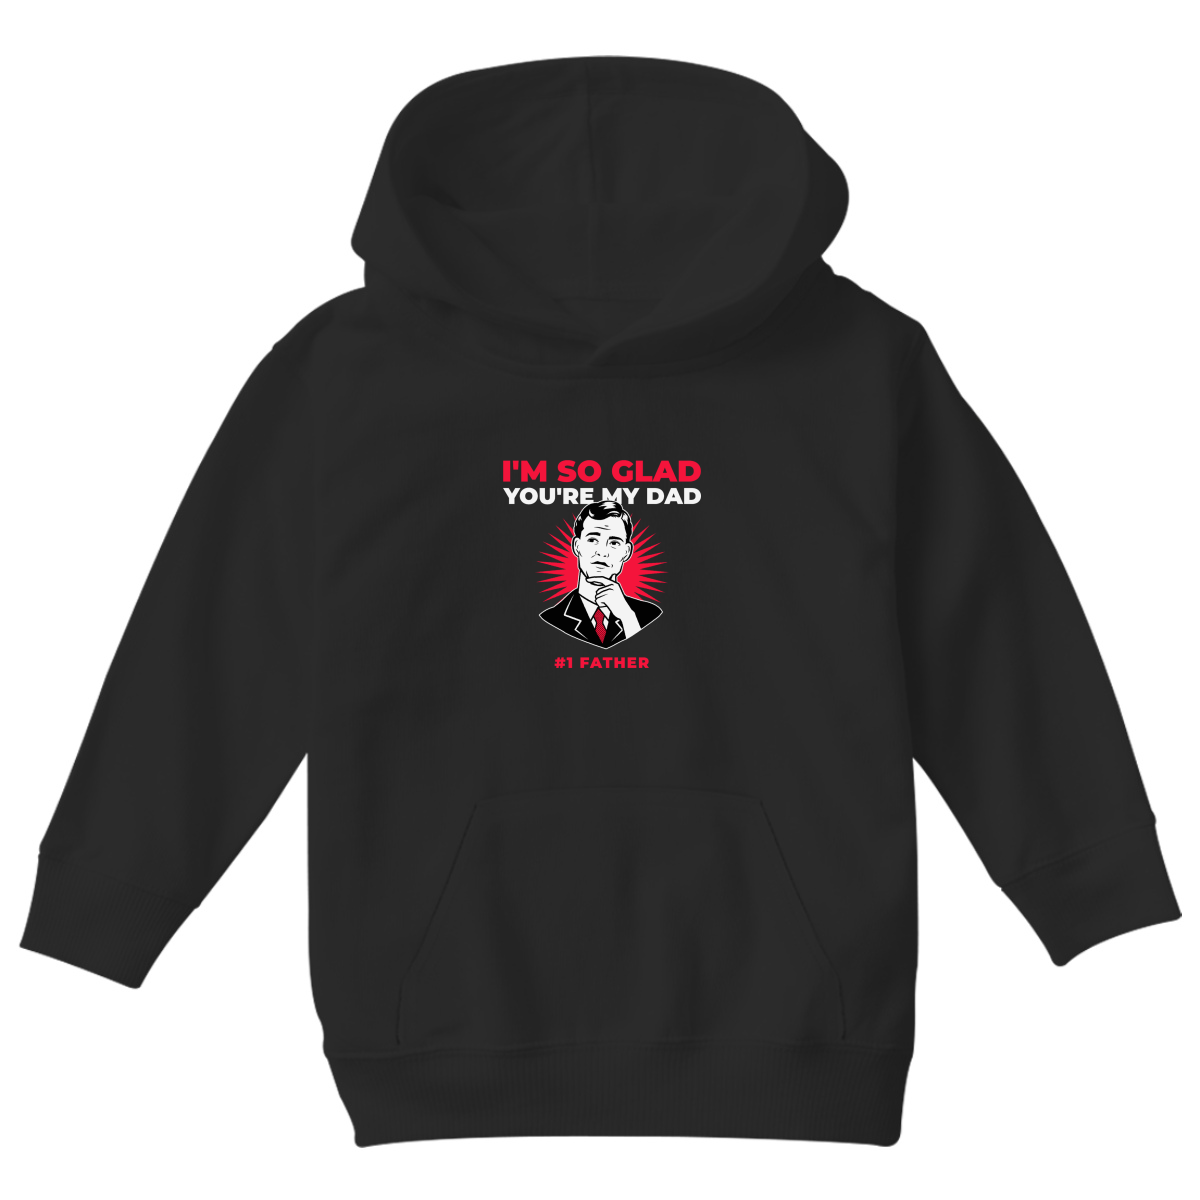 I'm so glad you are my dad Kids Hoodie | Black